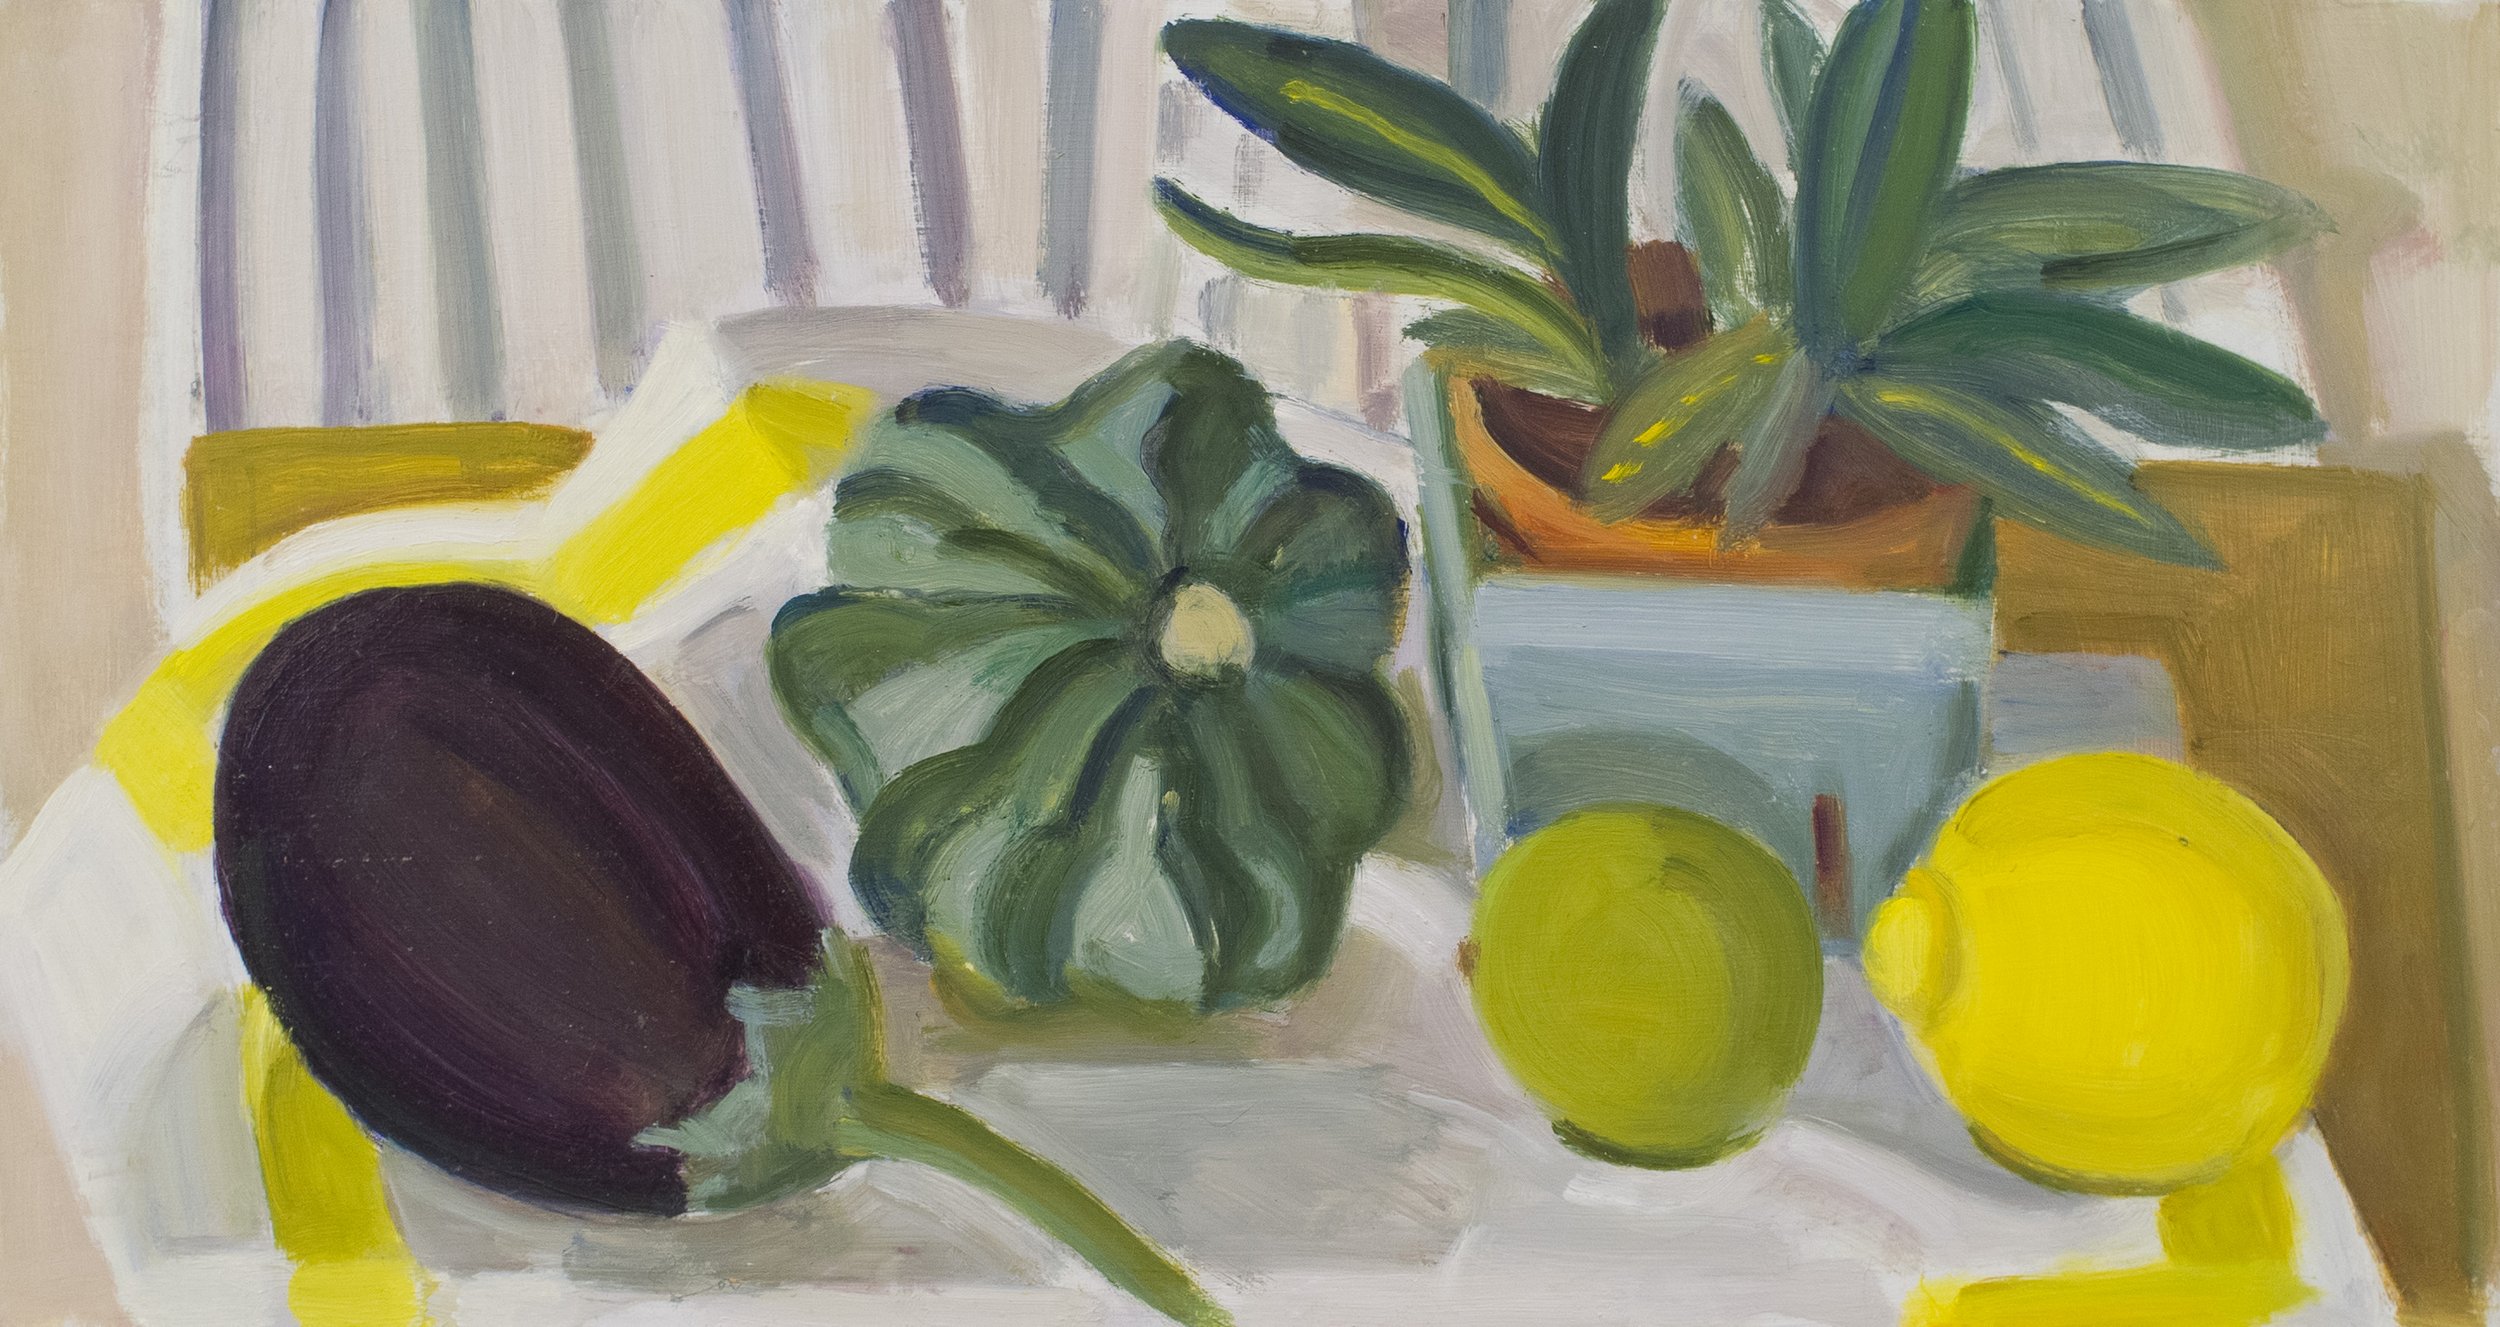   Eggplant, Striped Pattypan and Plant in Box , 2019, oil/panel unframed, 8” x 15 (Private collection) 